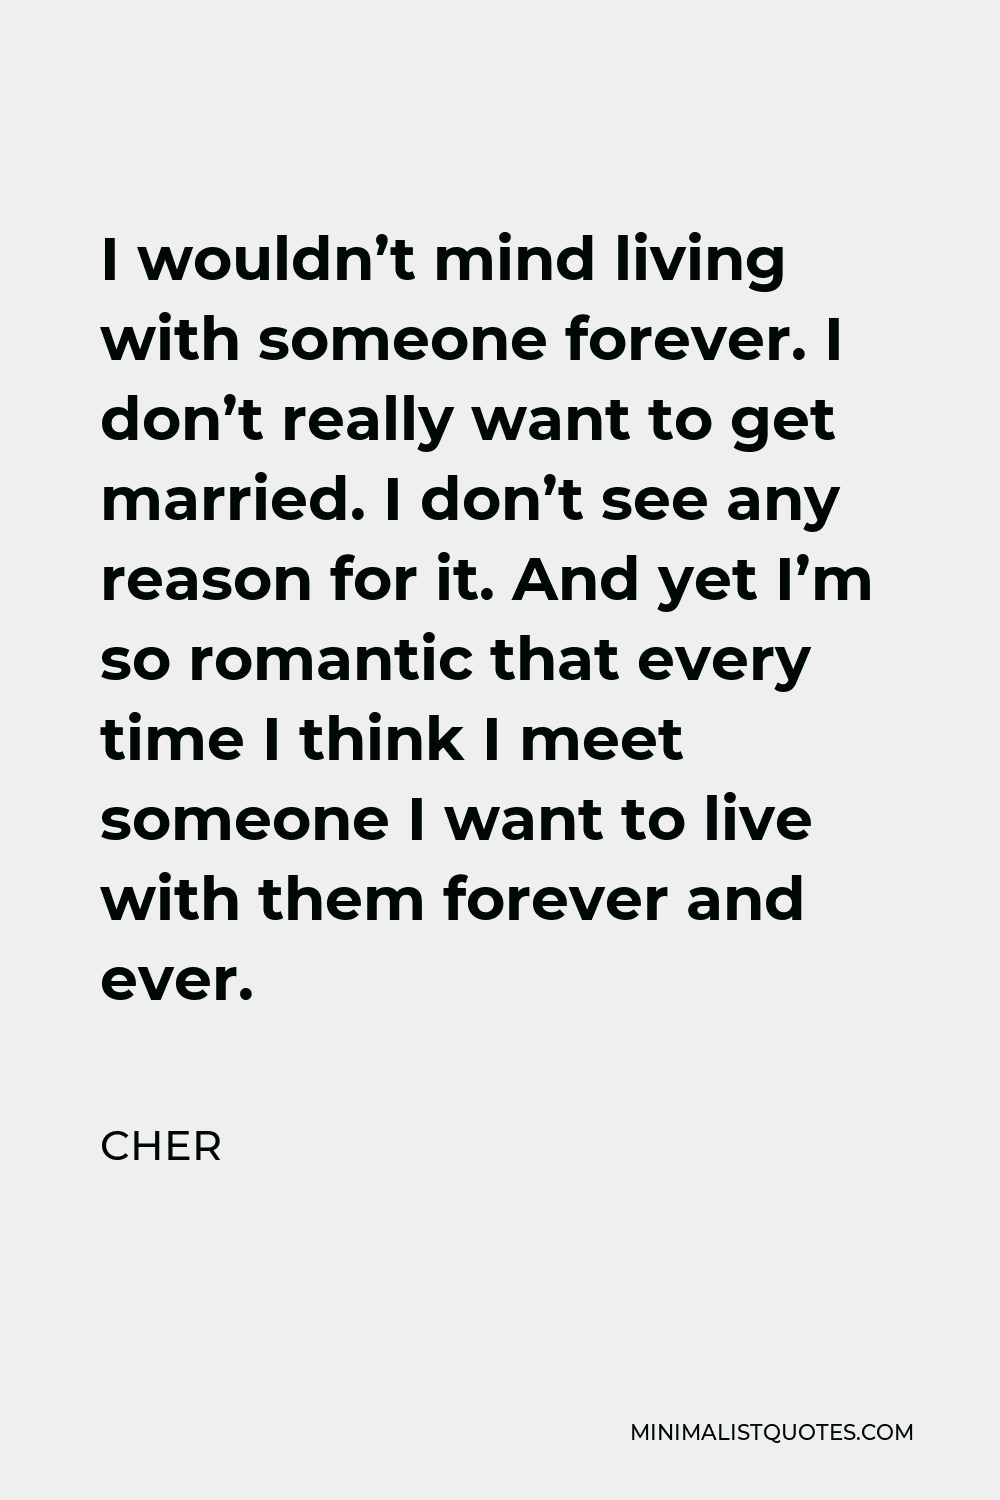 Cher Quote - I wouldn’t mind living with someone forever. I don’t really want to get married. I don’t see any reason for it. And yet I’m so romantic that every time I think I meet someone I want to live with them forever and ever.